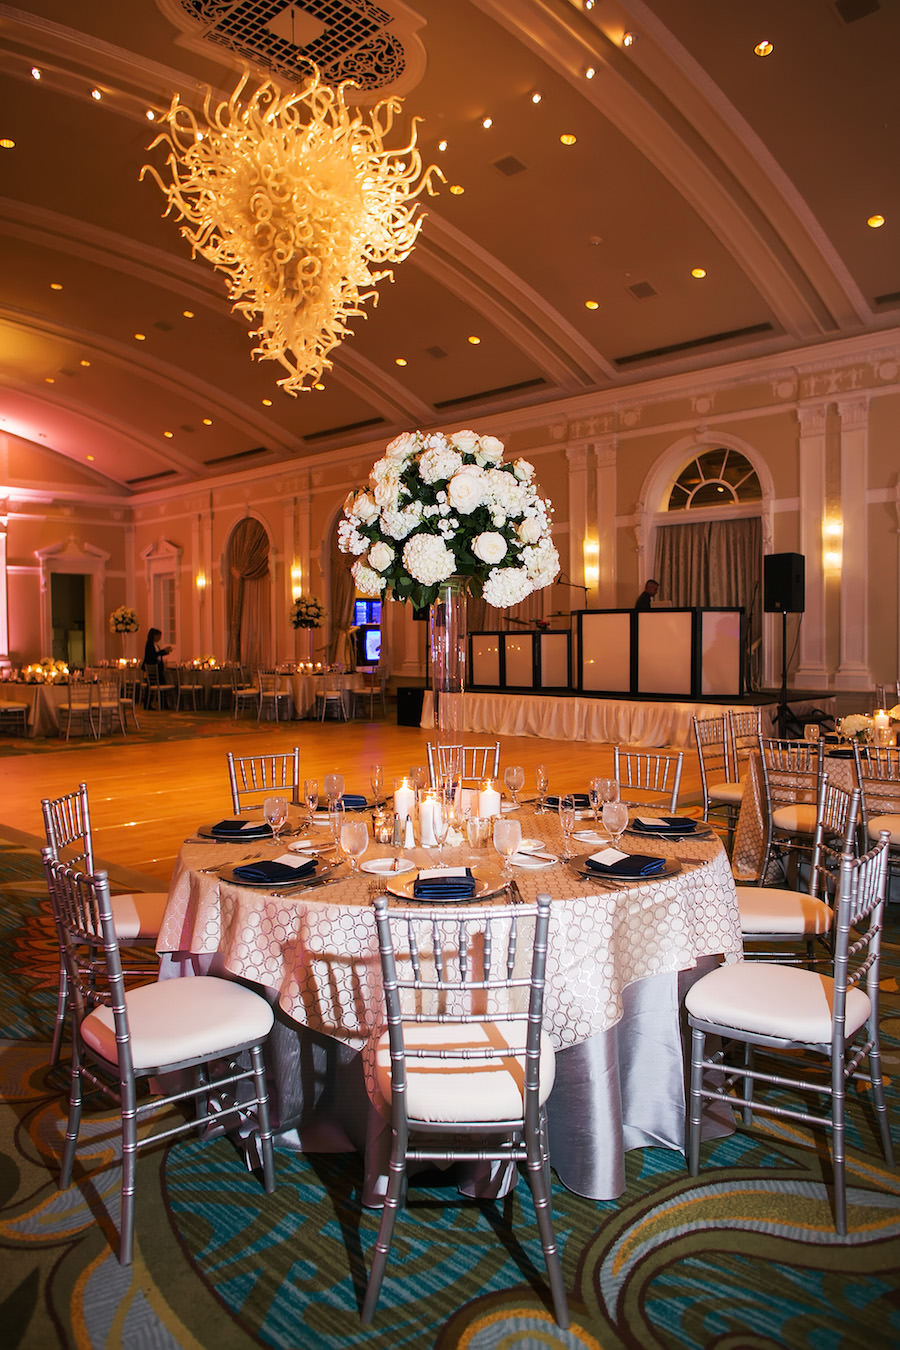 Classic Wedding Reception With Navy, White and Ivory Centerpieces, Silver Chiavari Chairs and Chihuly Chandelier | St. Petersburg Wedding Venue Vinoy Renaissance | Limelight Photography